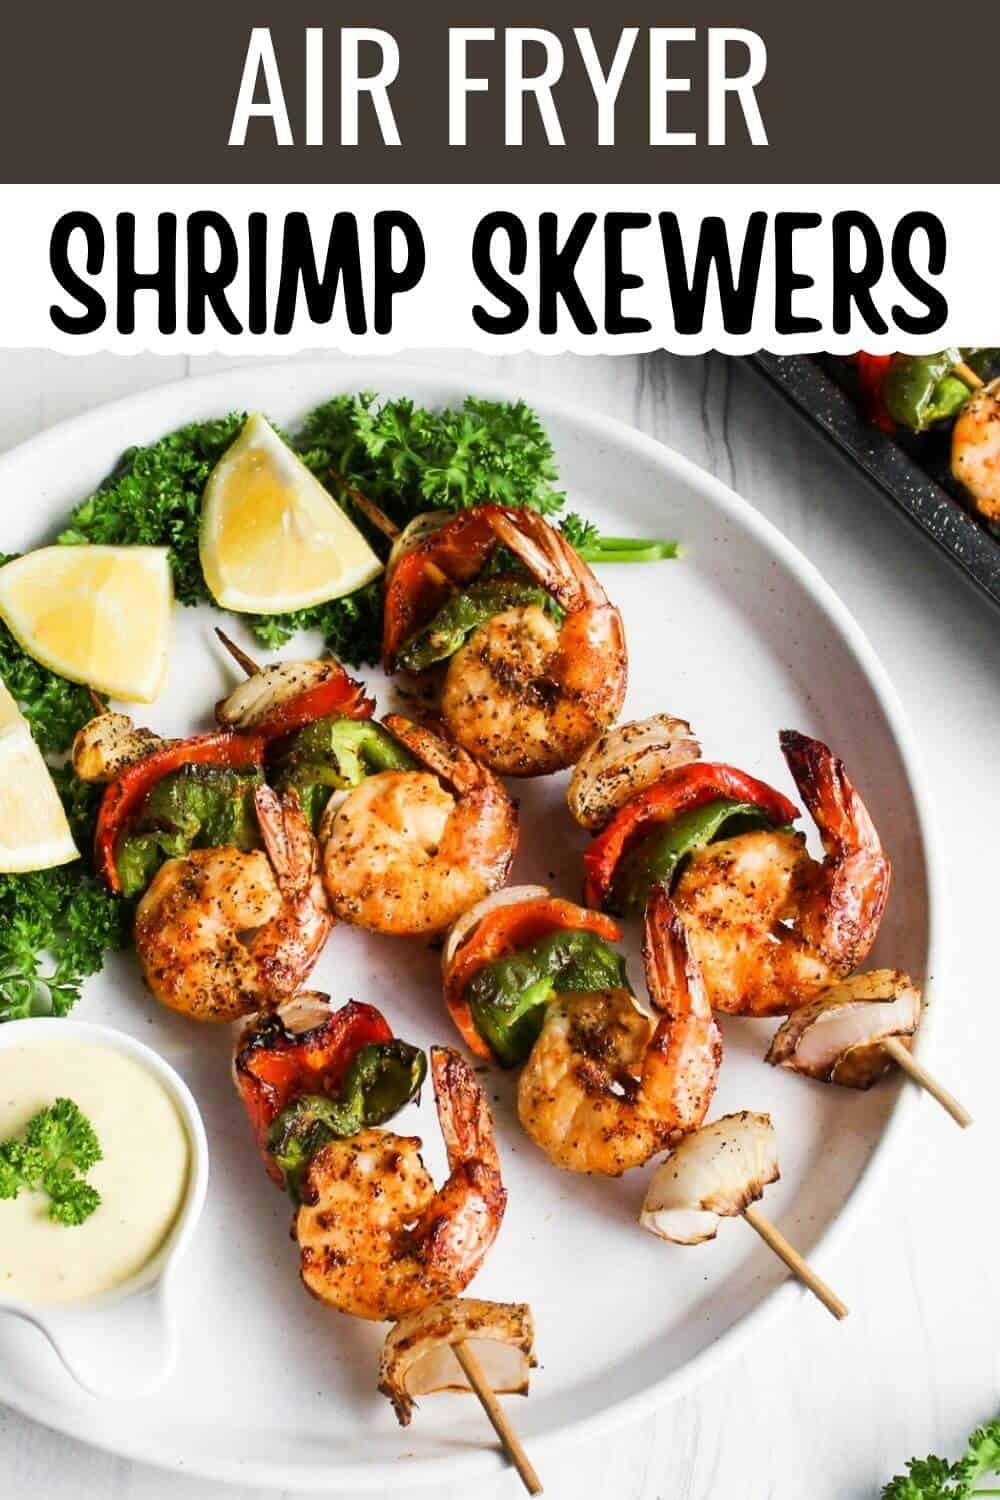 Grilled shrimp skewers on plate with lemons and dip.